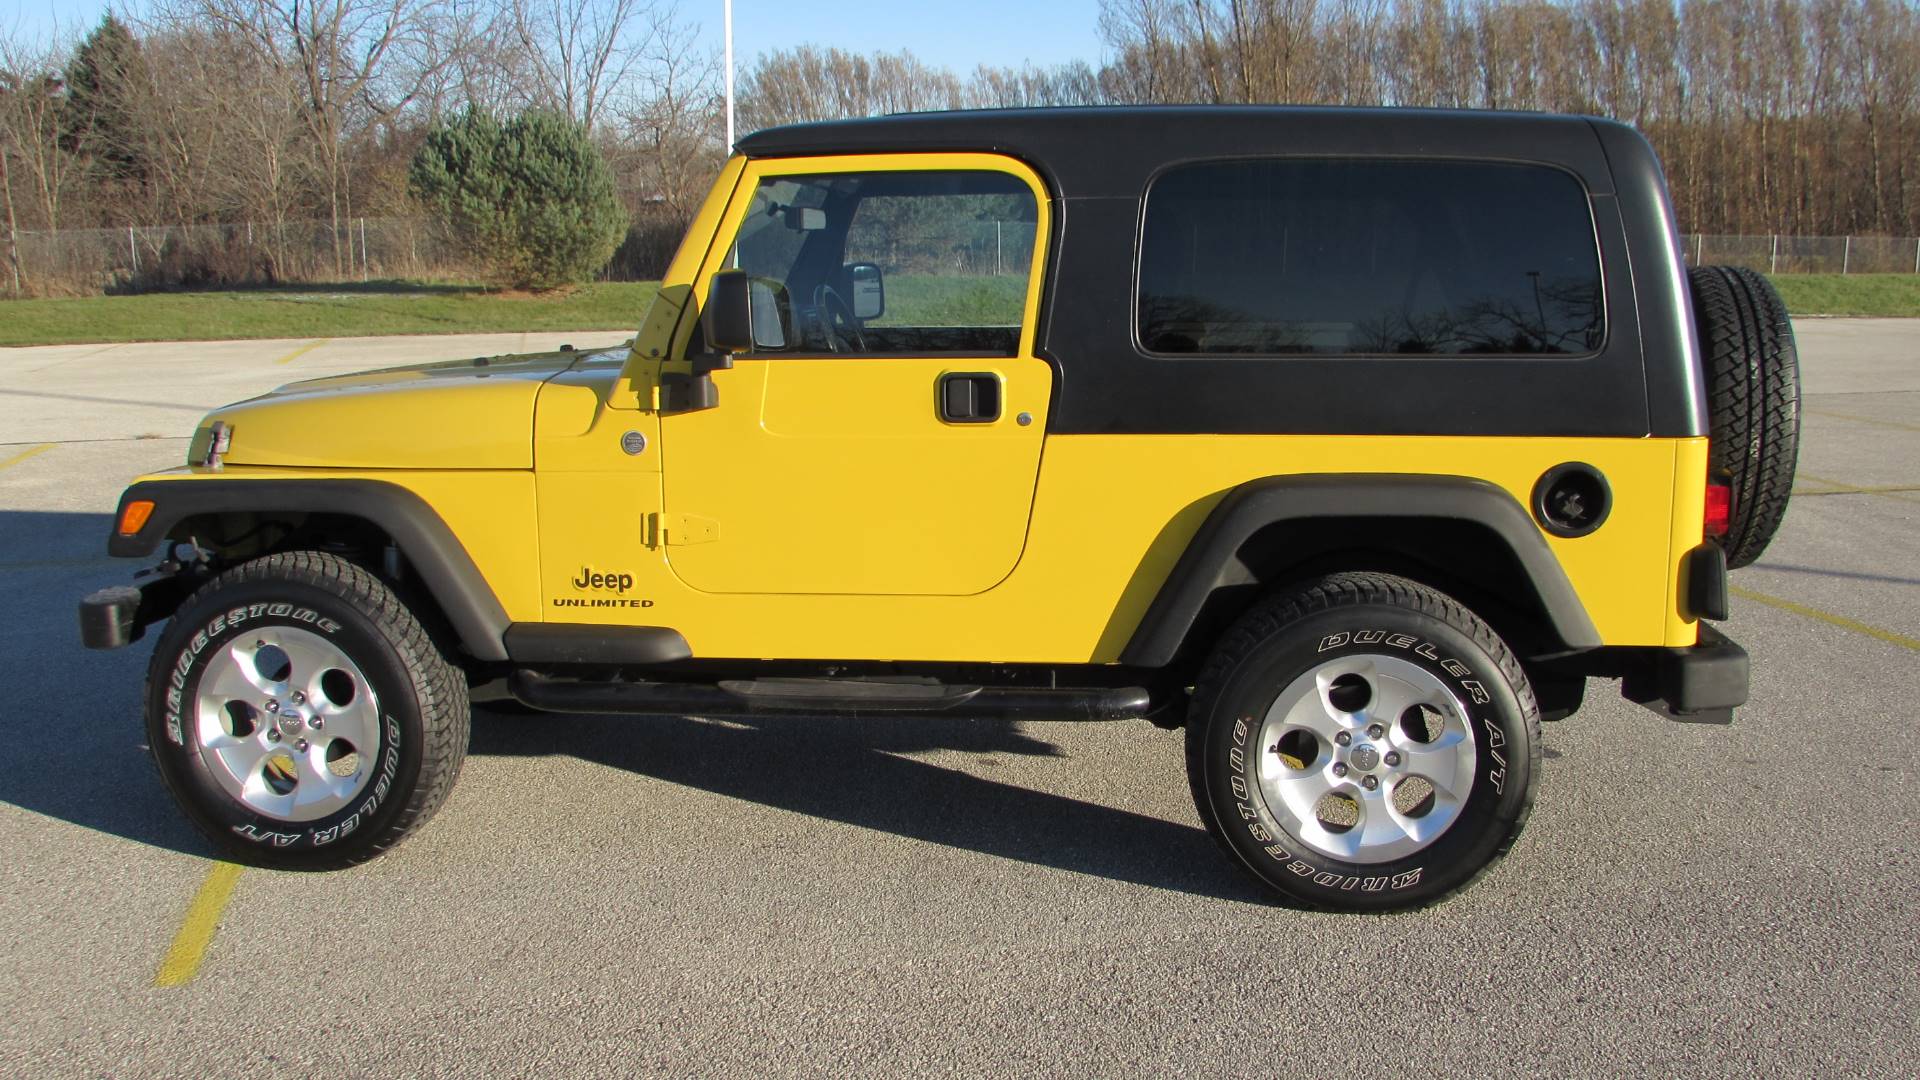 Used 2006 Jeep Wrangler Unlimited LJ | Automobile in Big Bend WI | 3063  Yellow